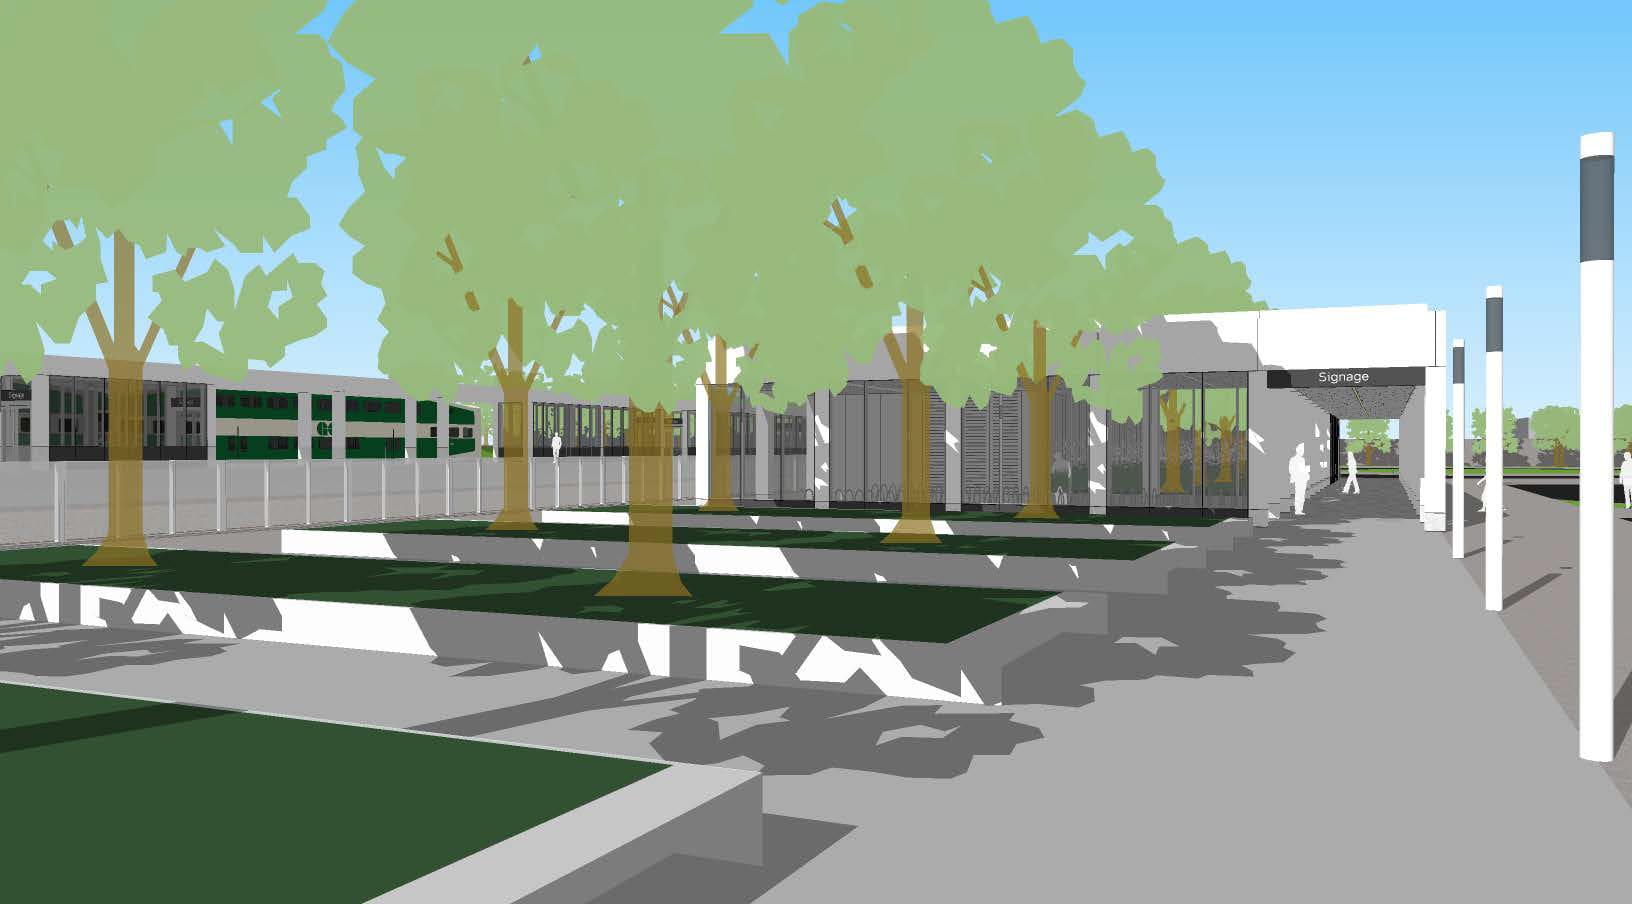 Rendering shows trees in front of a station,